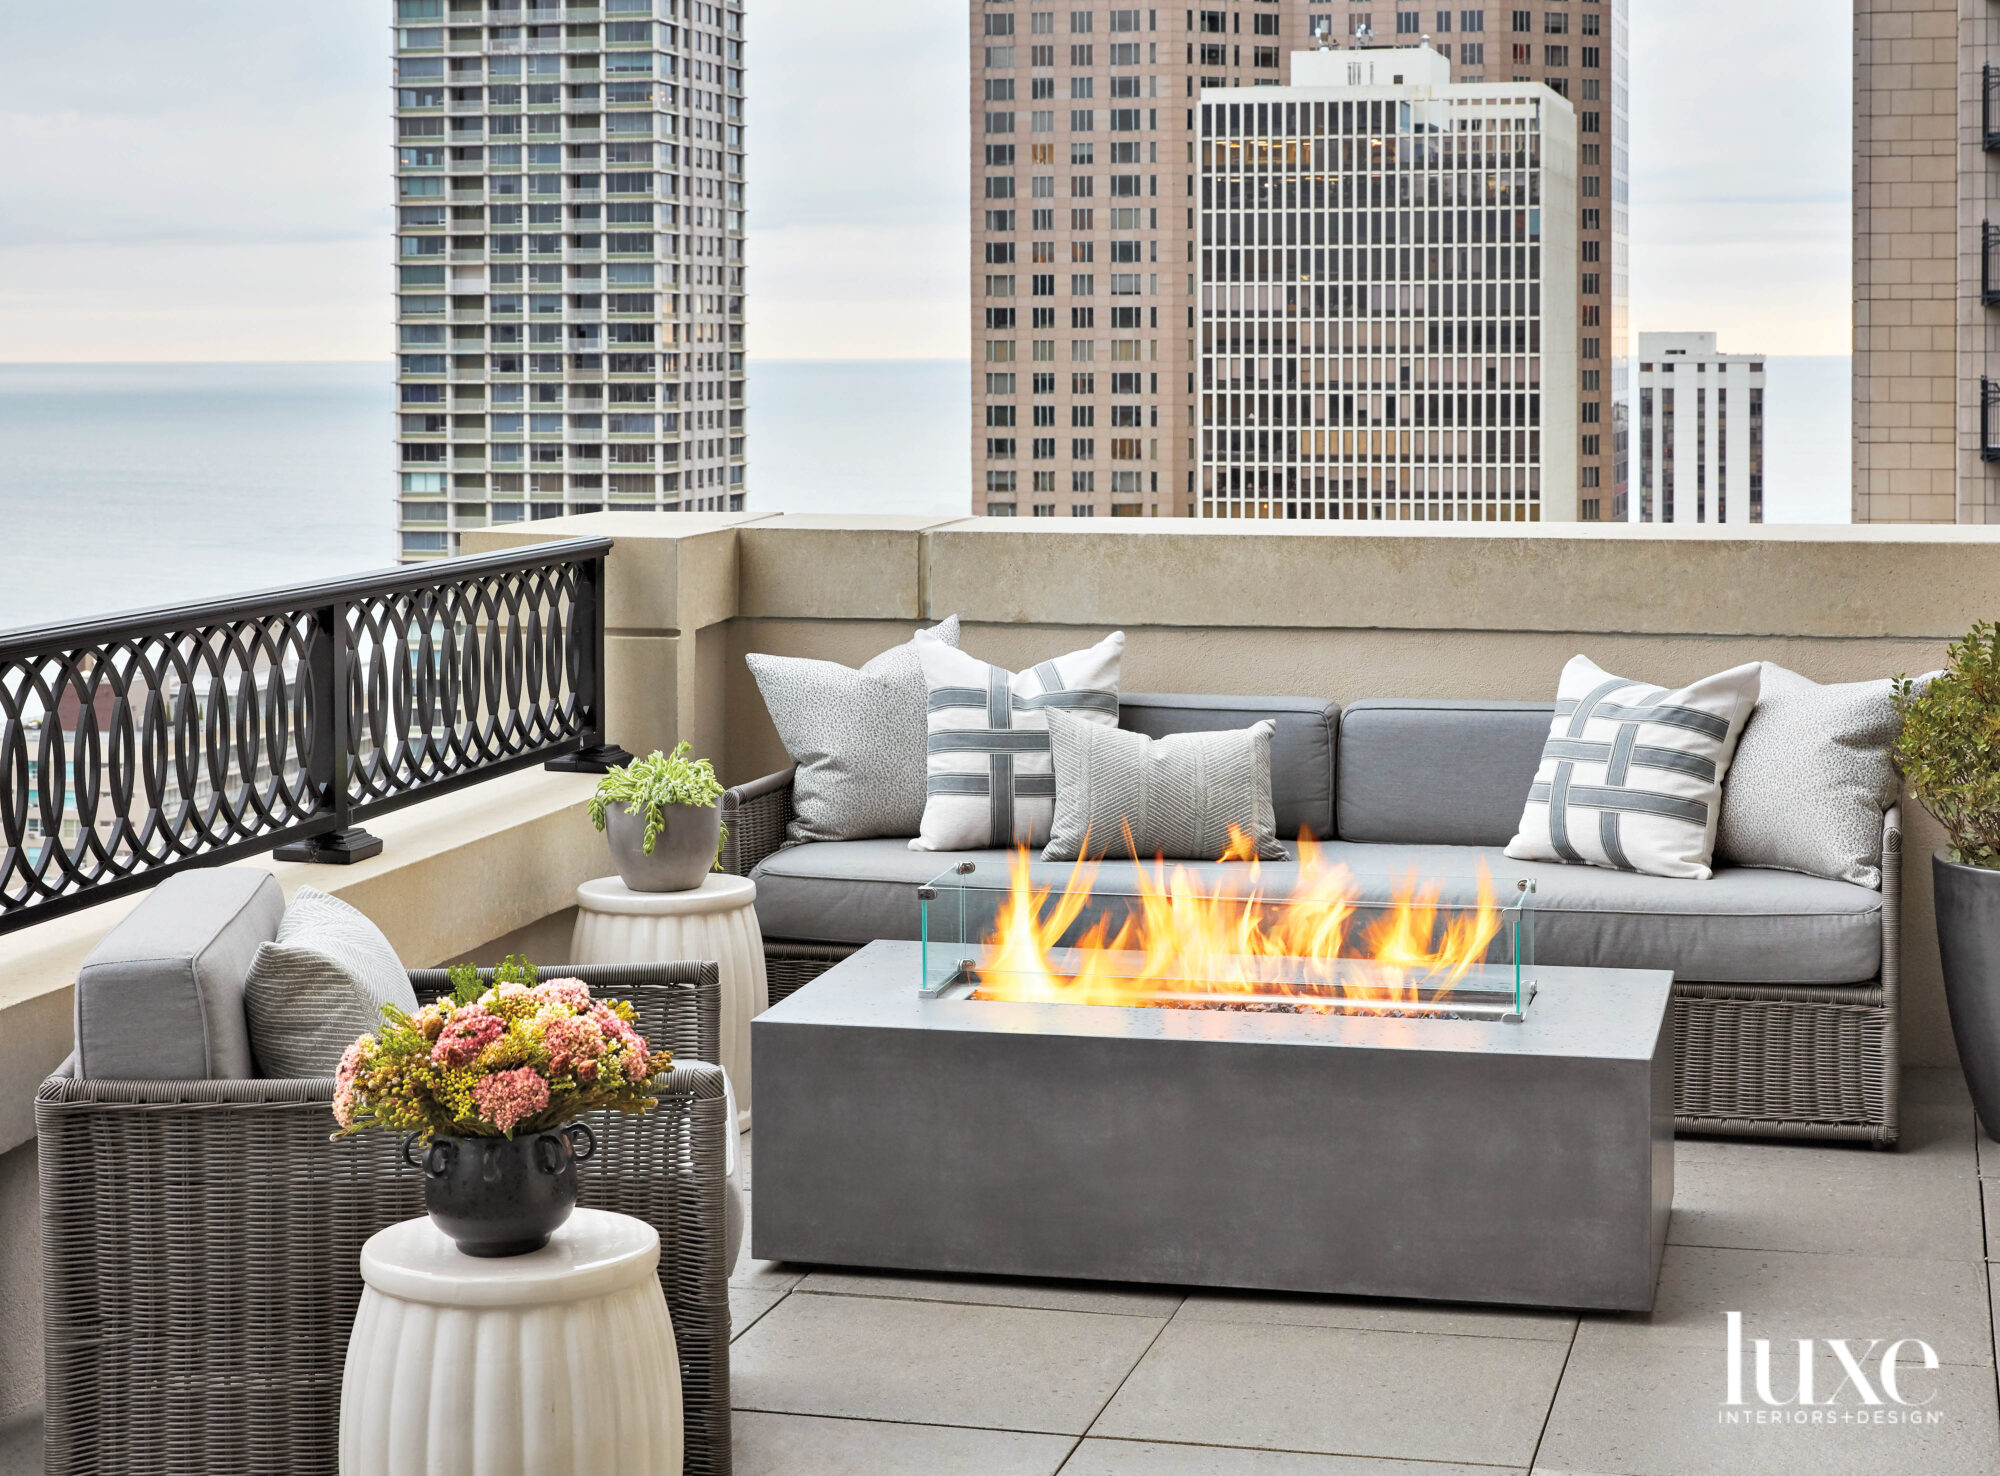 A balcony seating area overlooking Chicago skyline.